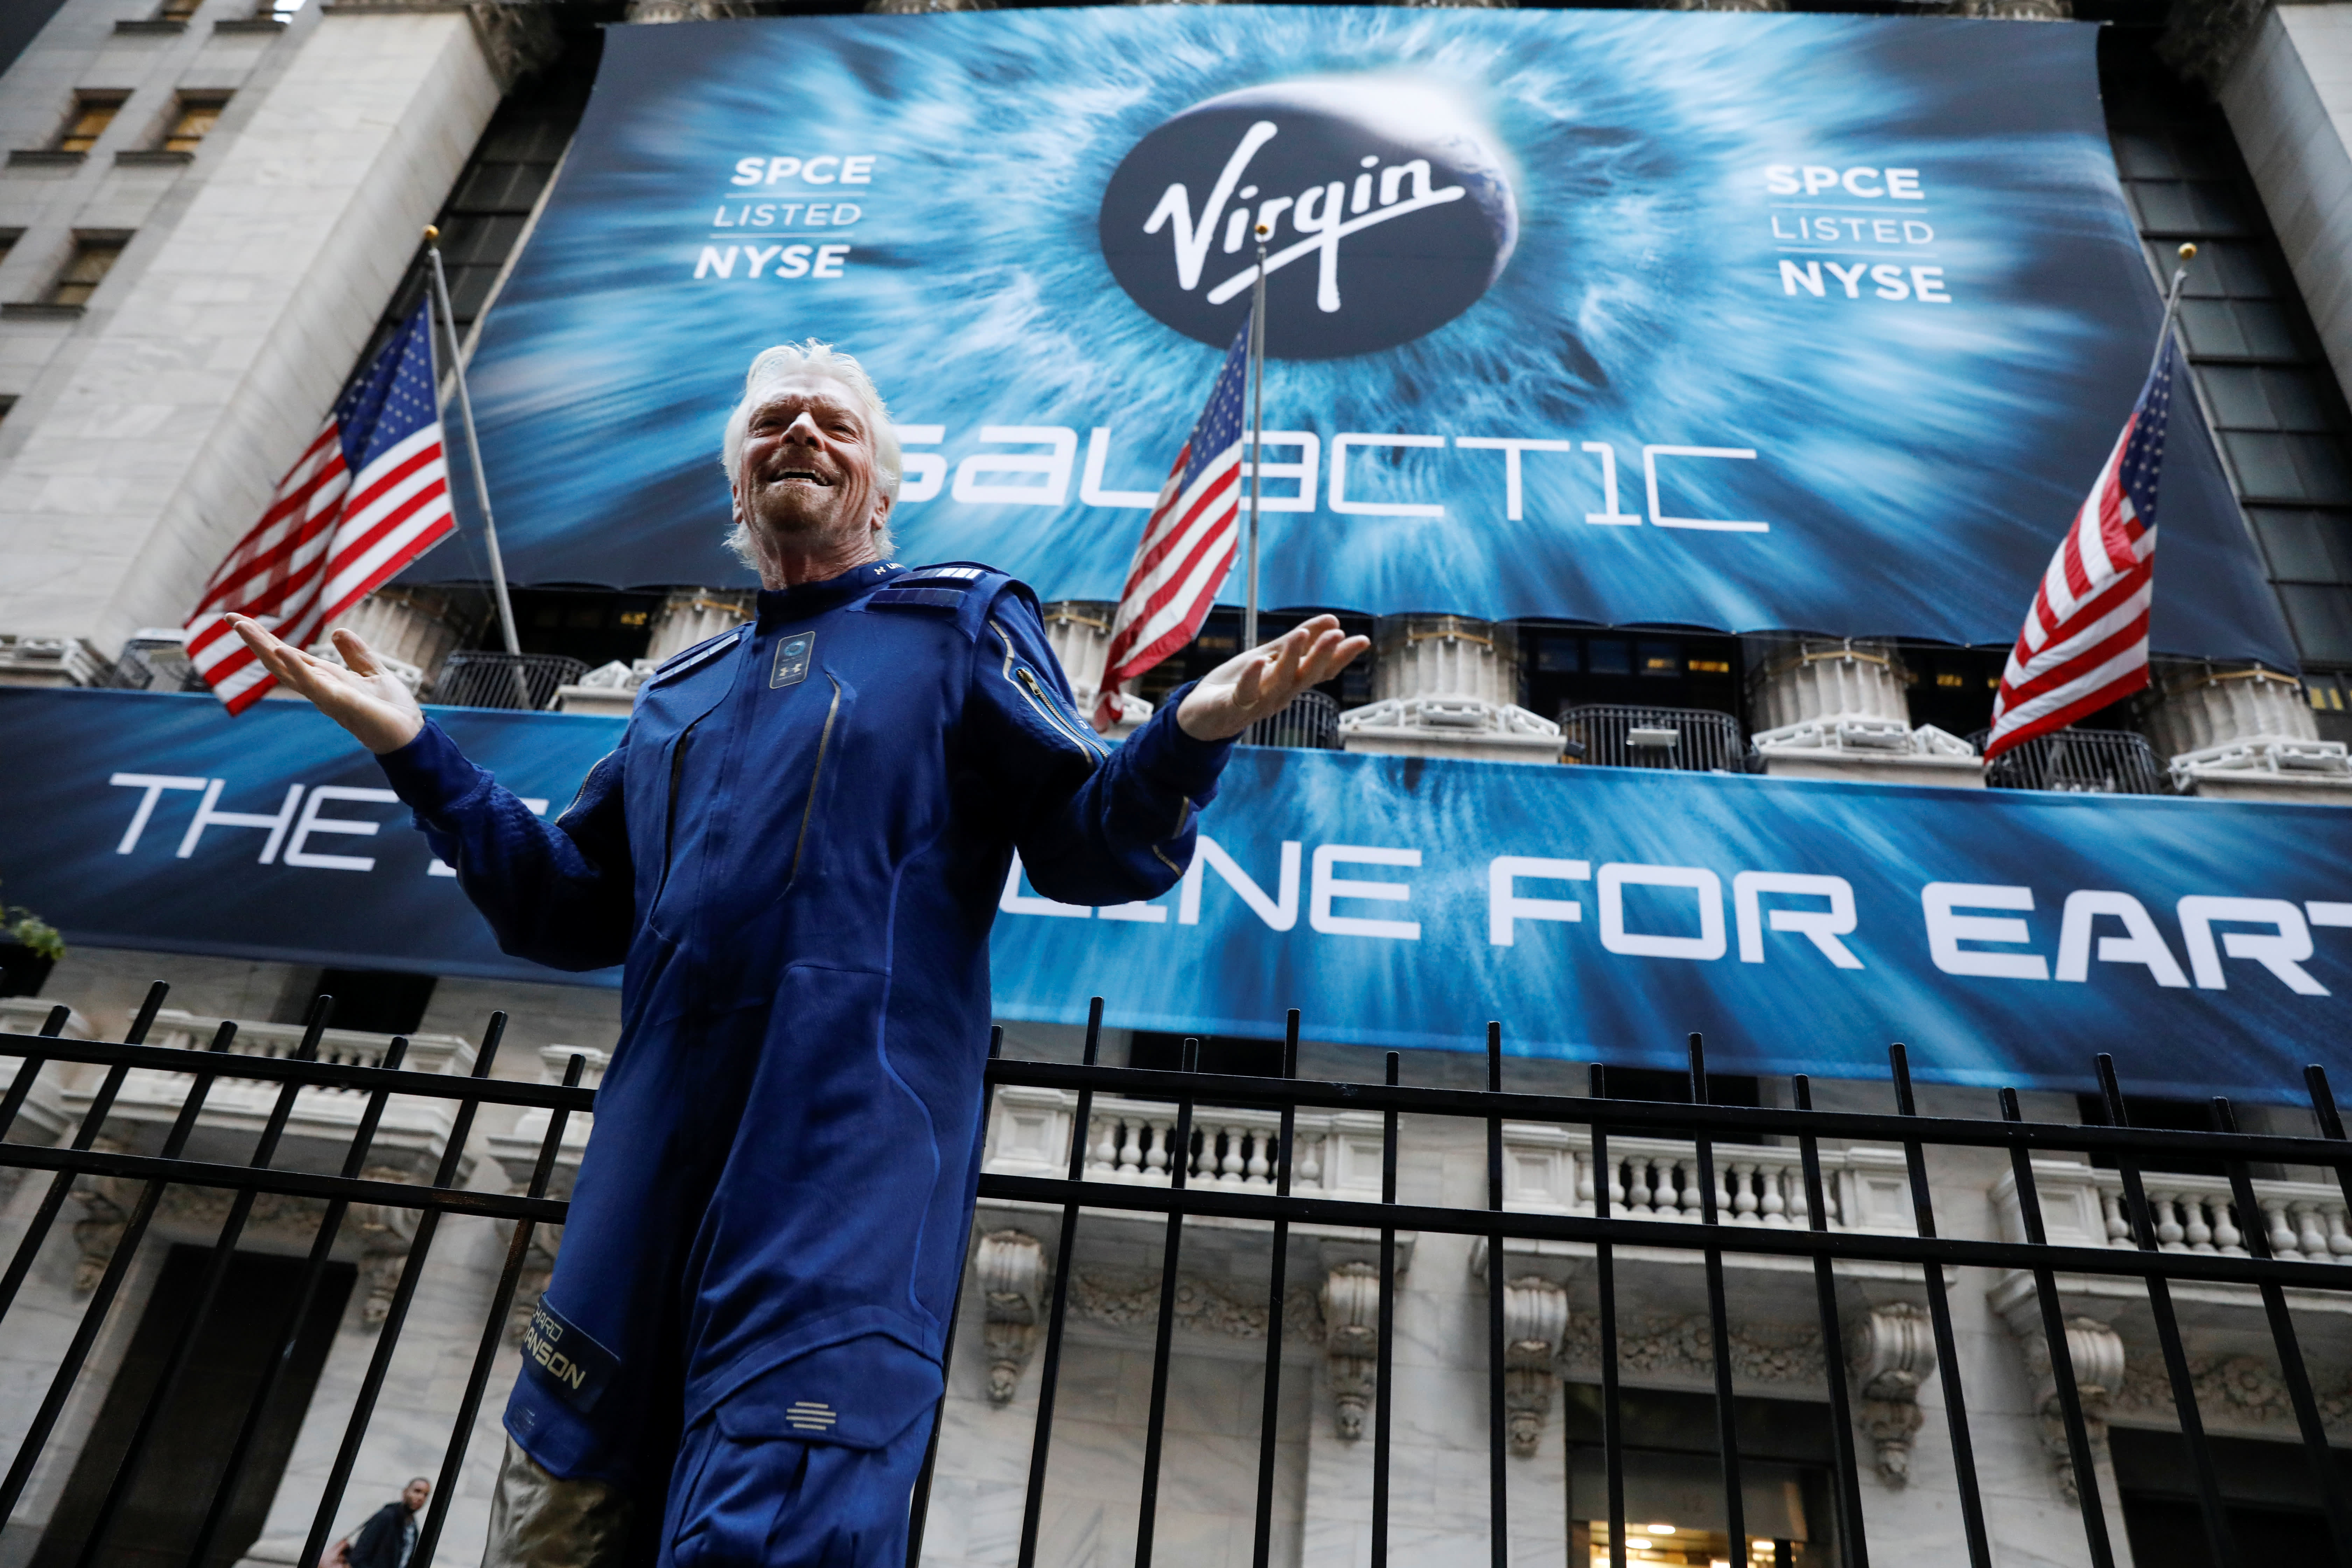 Virgin galactic stock ipo price investing in water technology stocks